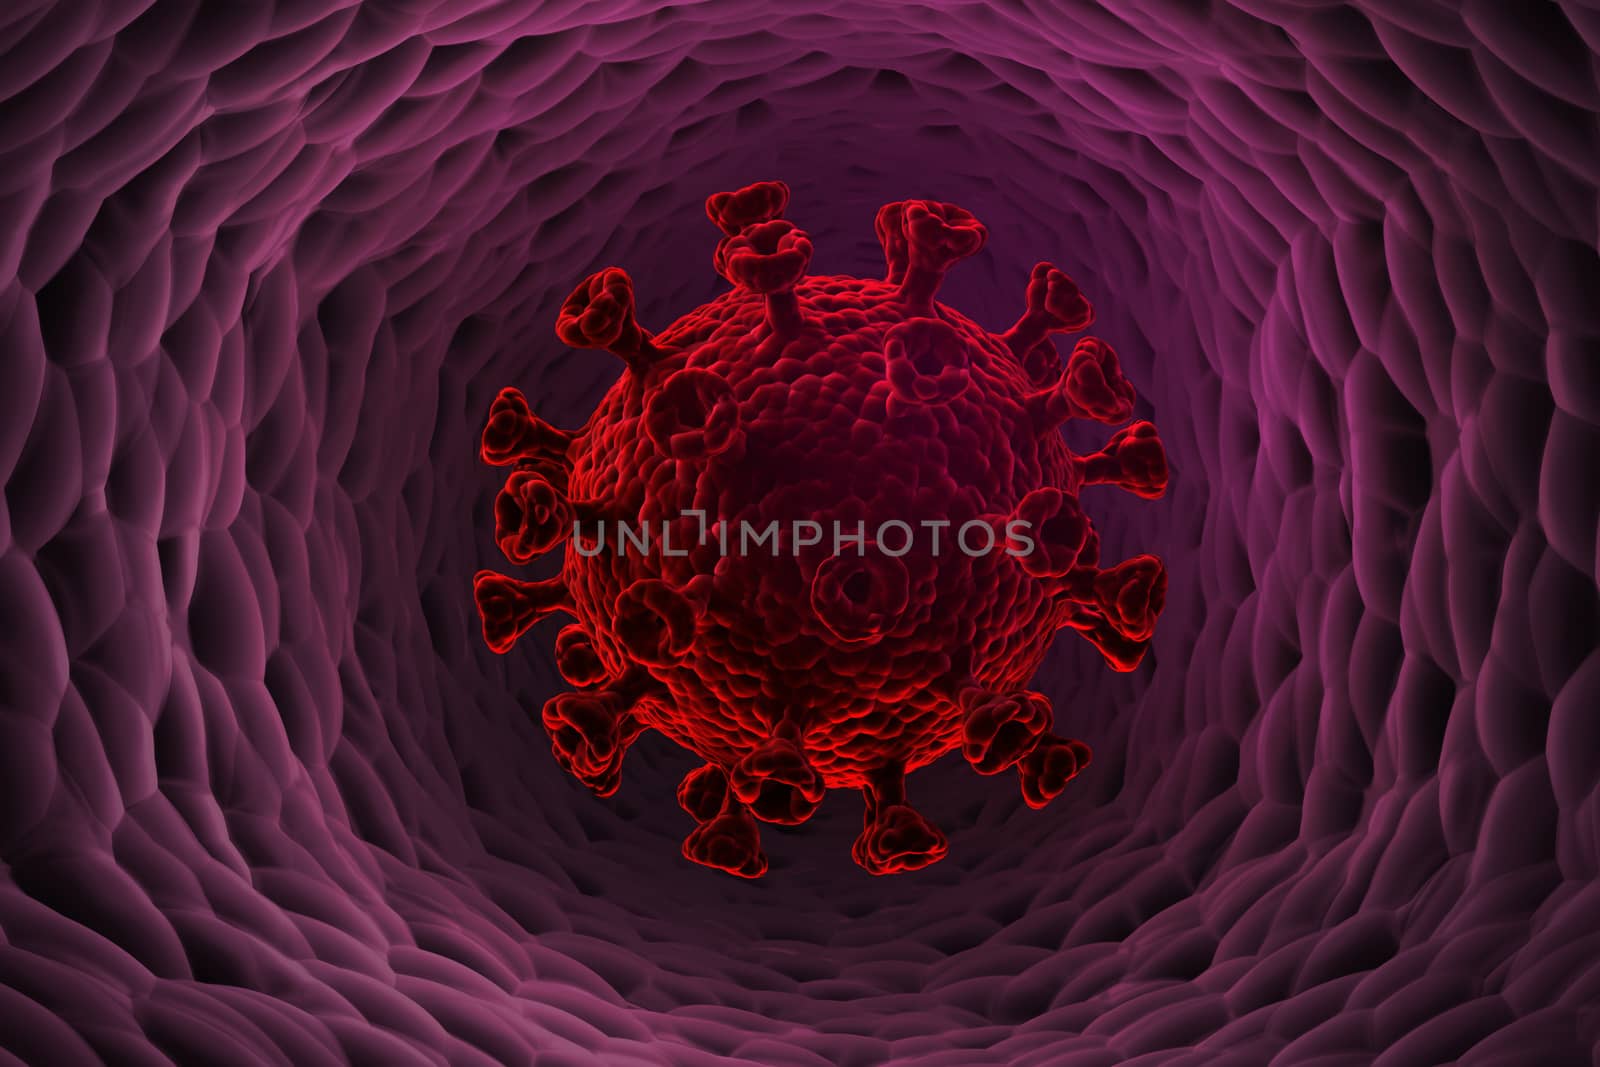 An illustration showing a coronavirus in the human body